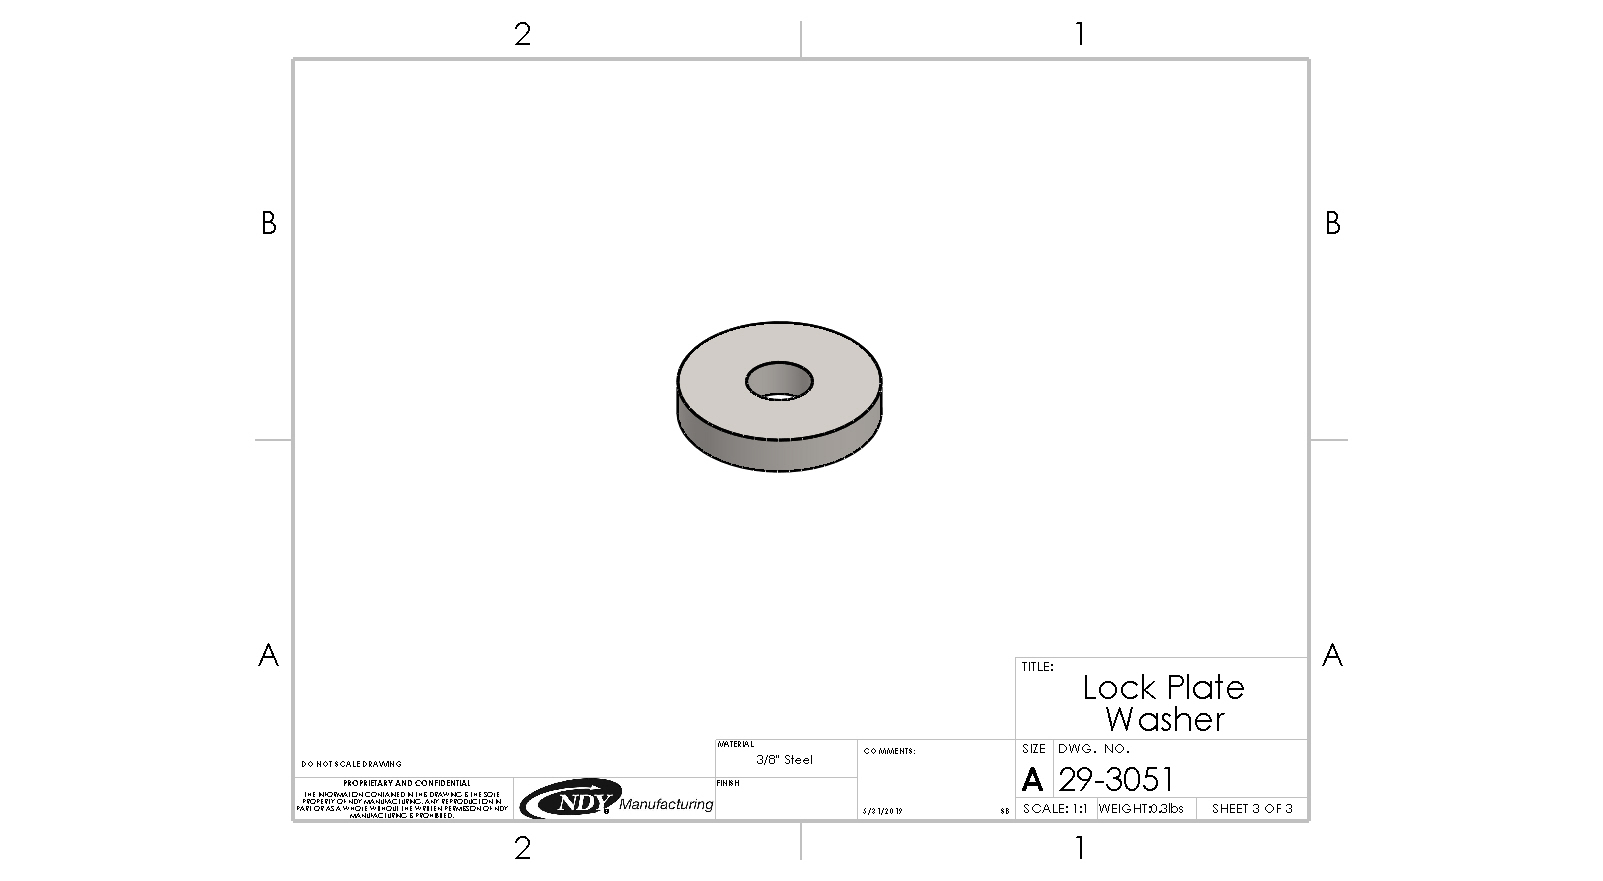 A drawing of a Rock Box Lock Plate Washer ratchet.